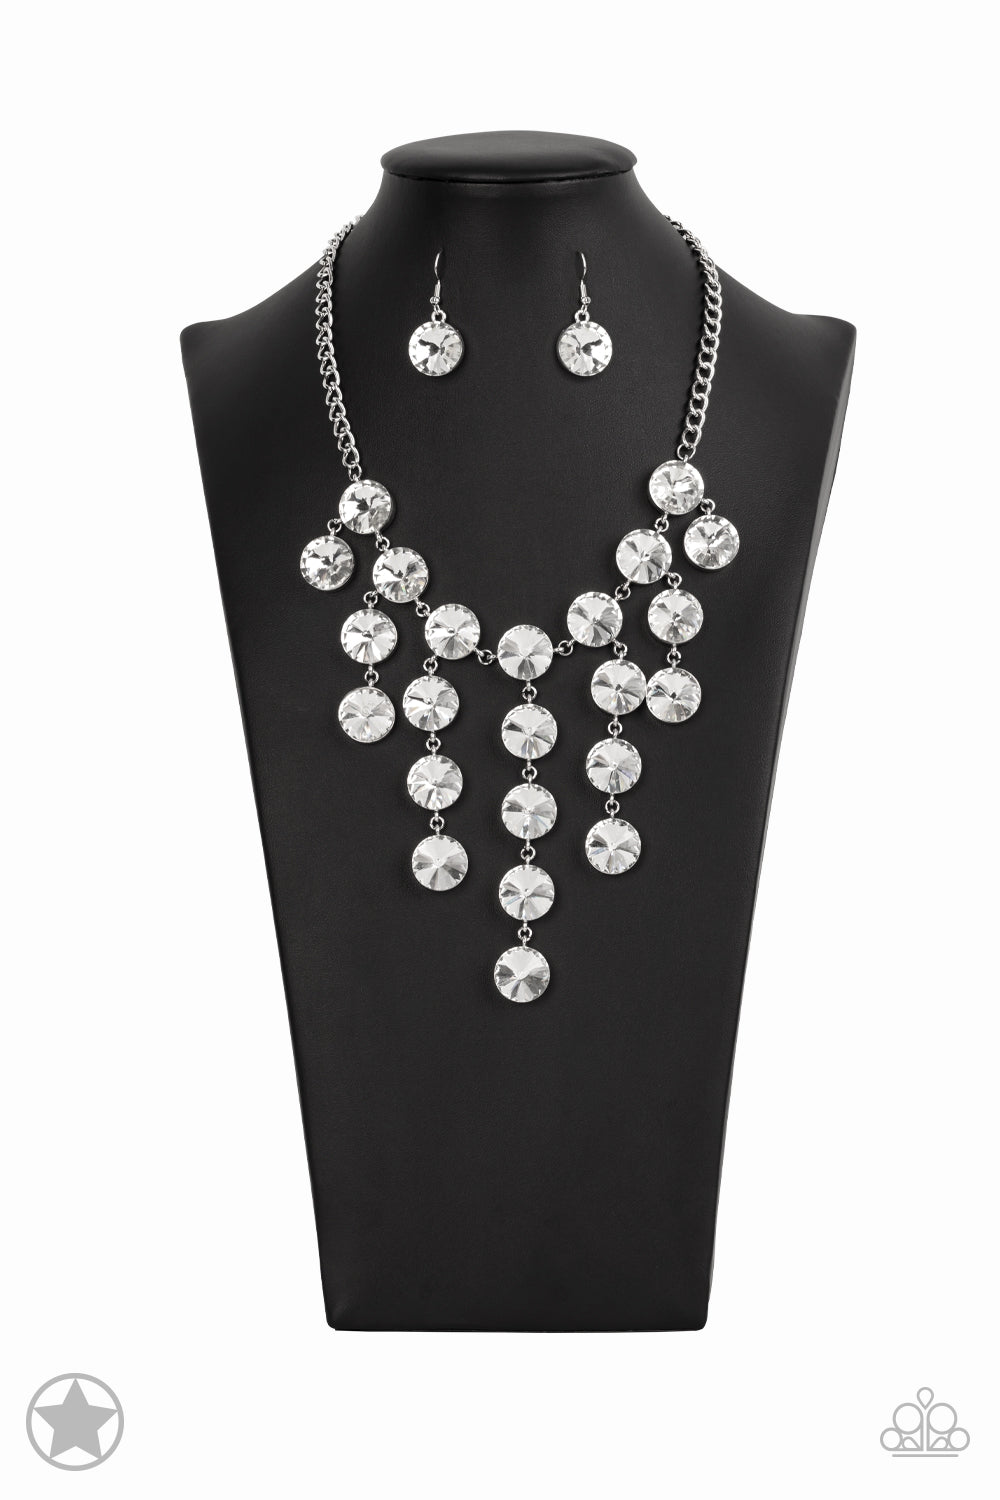 Spotlight Stunner Blockbuster Necklace - Paparazzi Accessories  Encased in sleek silver fittings, dramatically oversized white rhinestones delicately link into twinkly tassels that taper off into a jaw-dropping fringe below the collar. Features an adjustable clasp closure.  All Paparazzi Accessories are lead free and nickel free!  Sold as one individual necklace. Includes one pair of matching earrings.